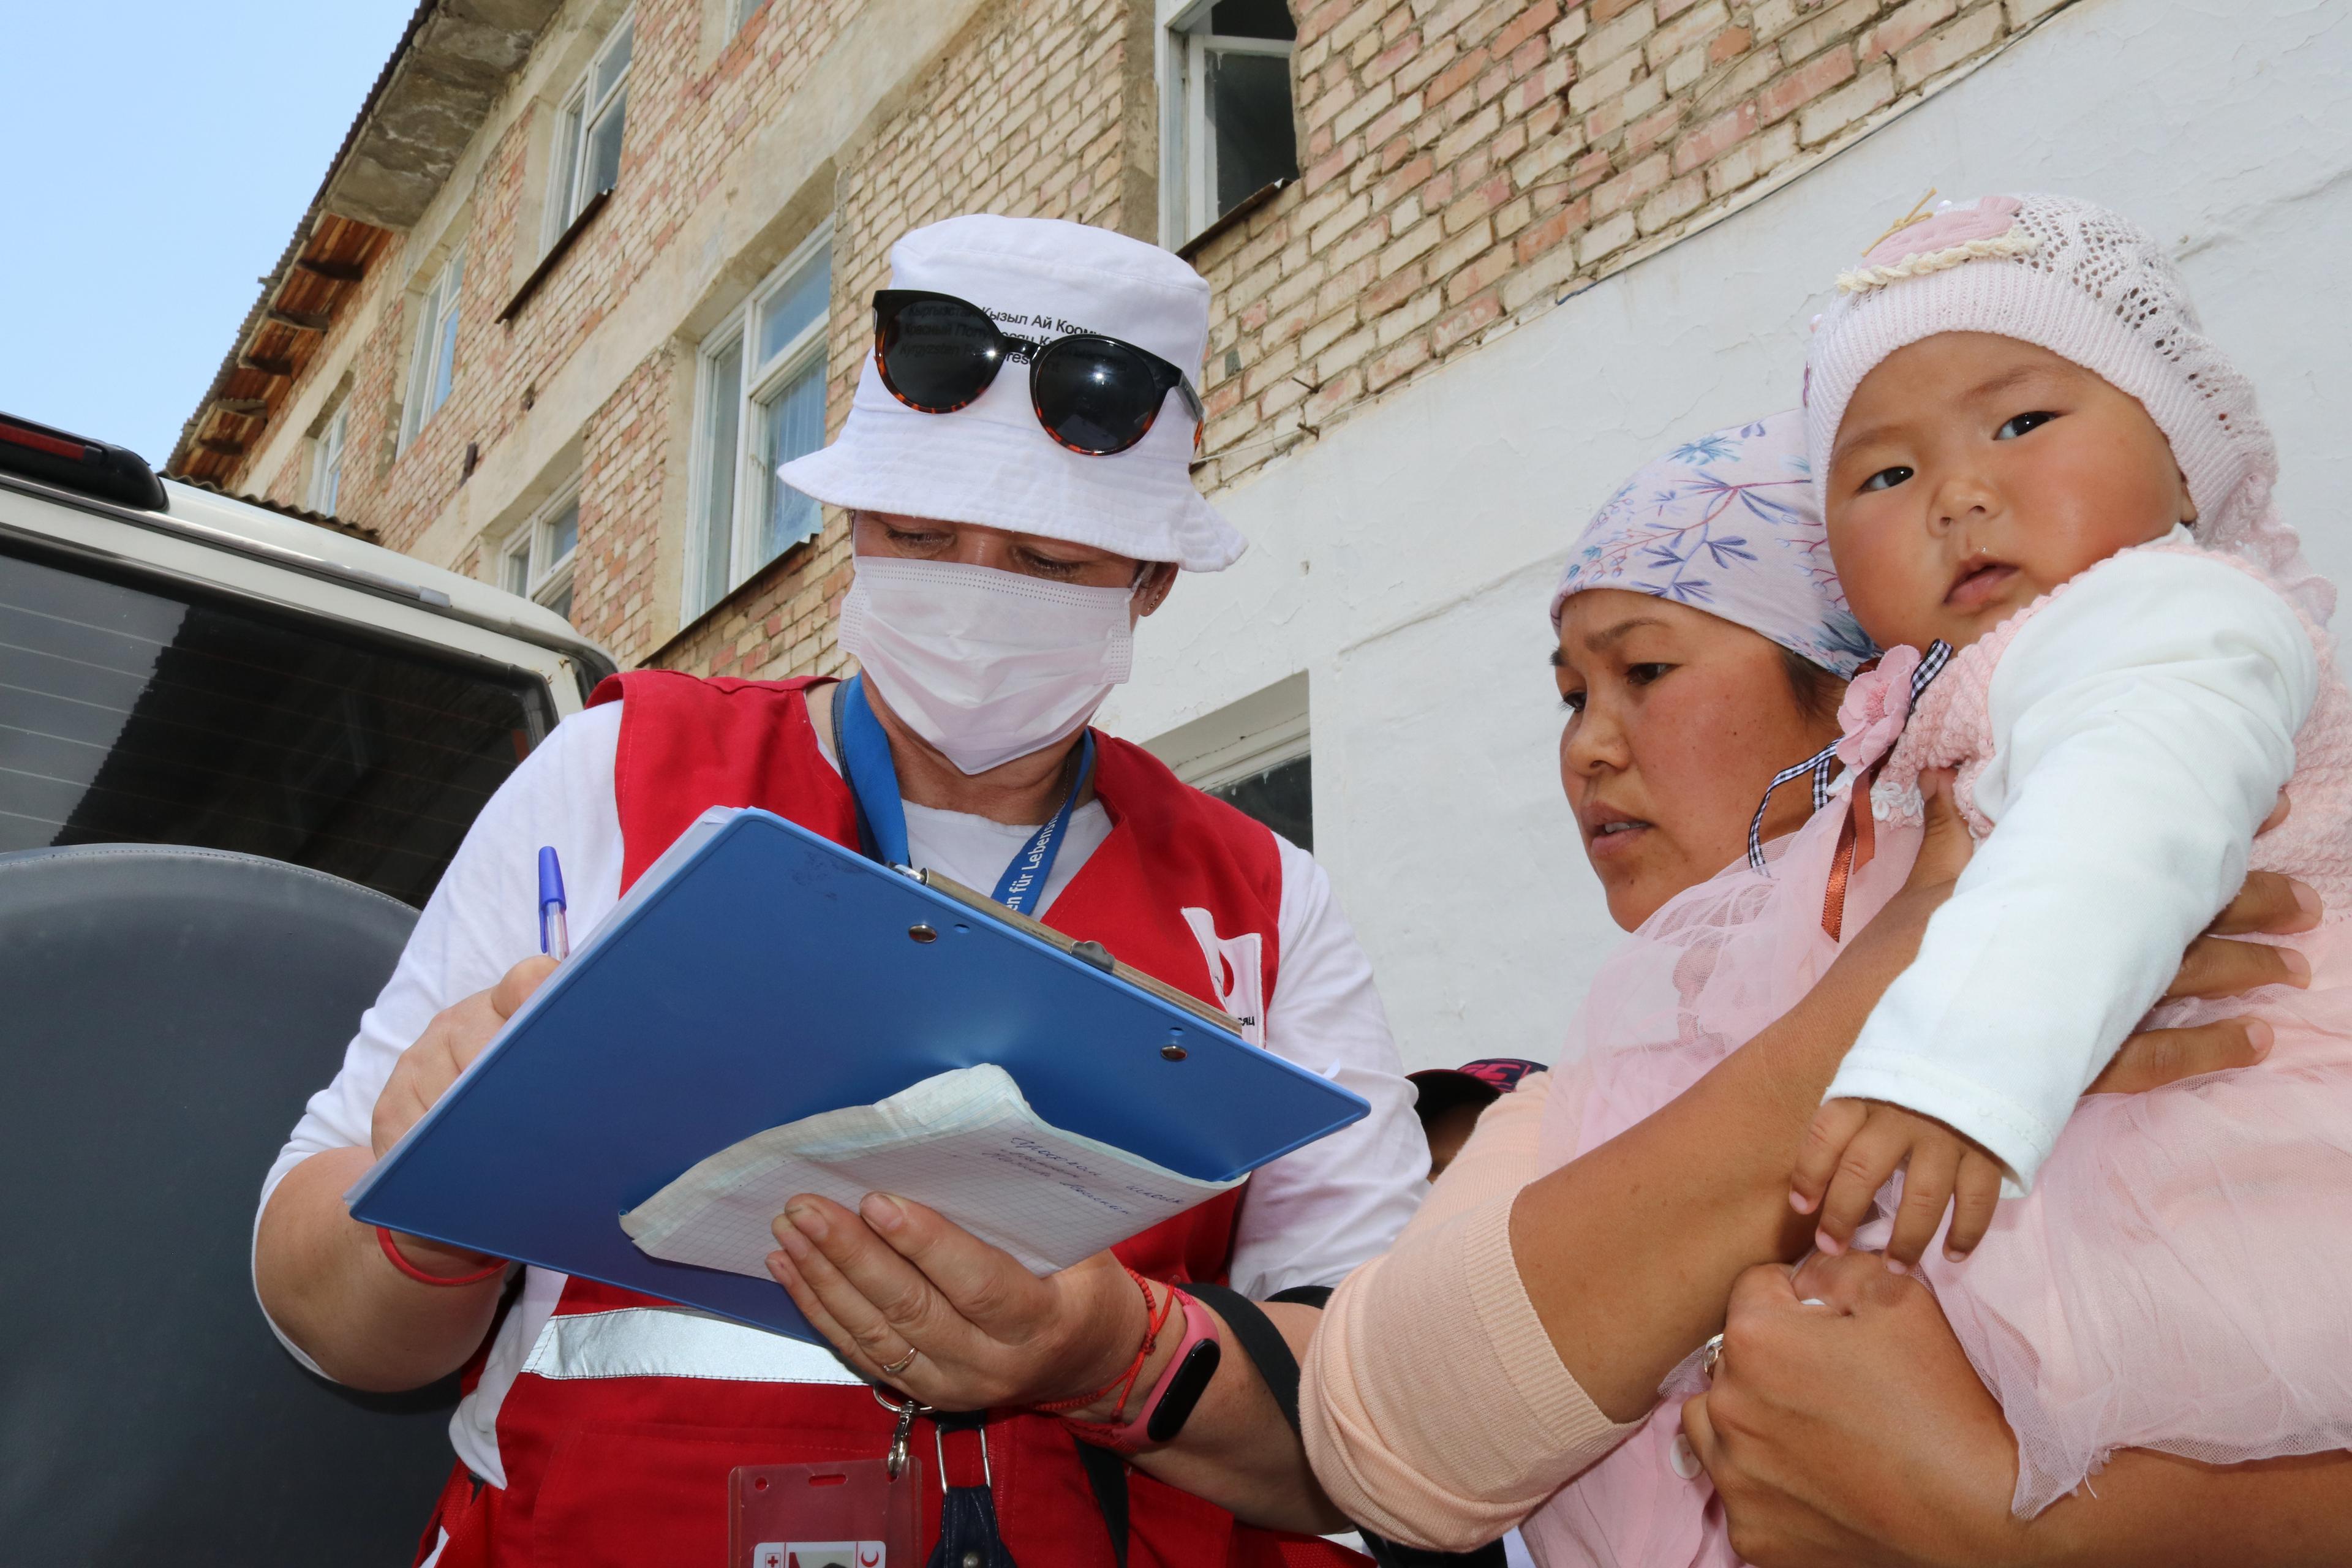 A woman market with Red Cross waistcoat wearing a sanitary mask writingon a sheet and a woman with child in her arms at her right looking at the sheet.